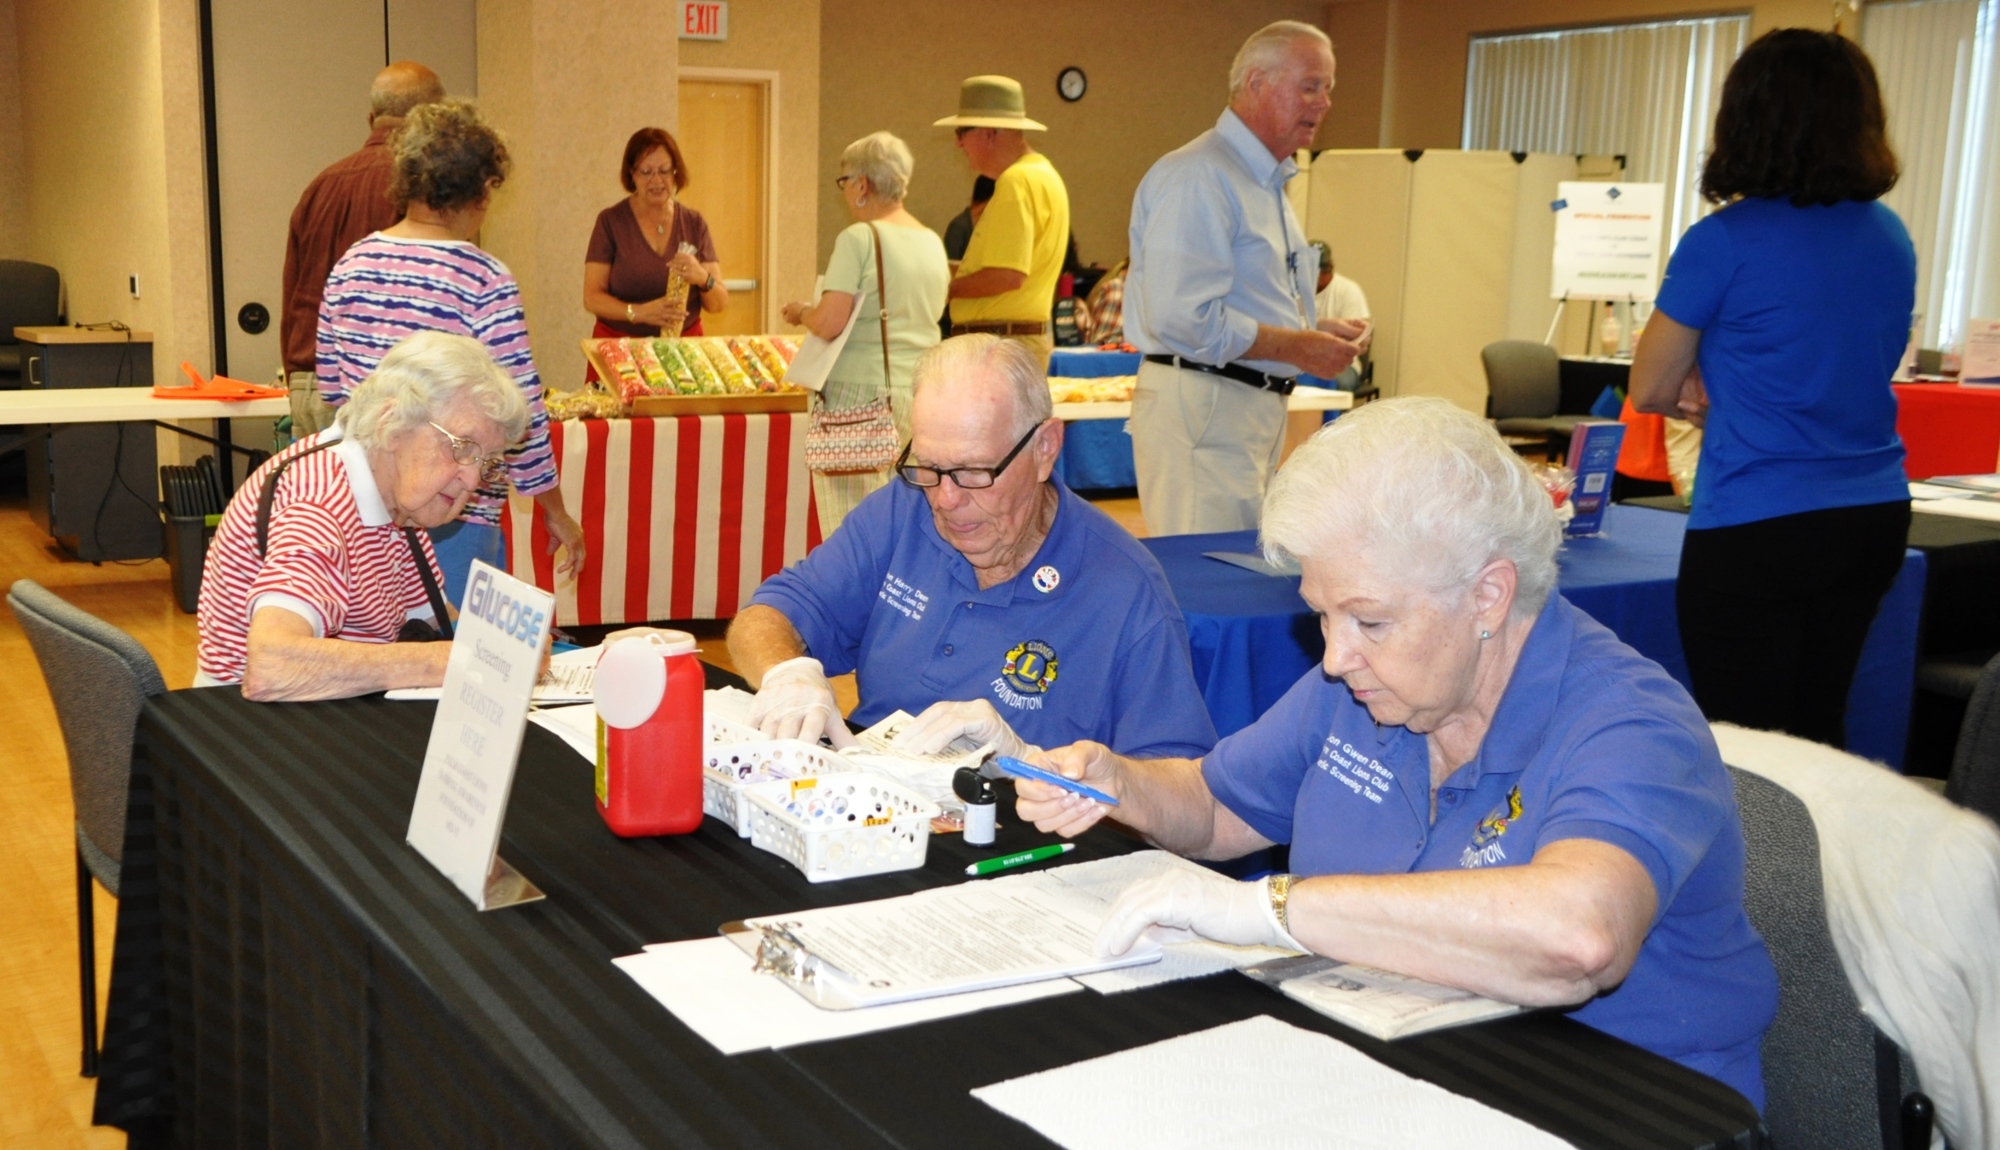 More than 100 community members participated in the Florida Hospital Flagler health fair. Courtesy photo